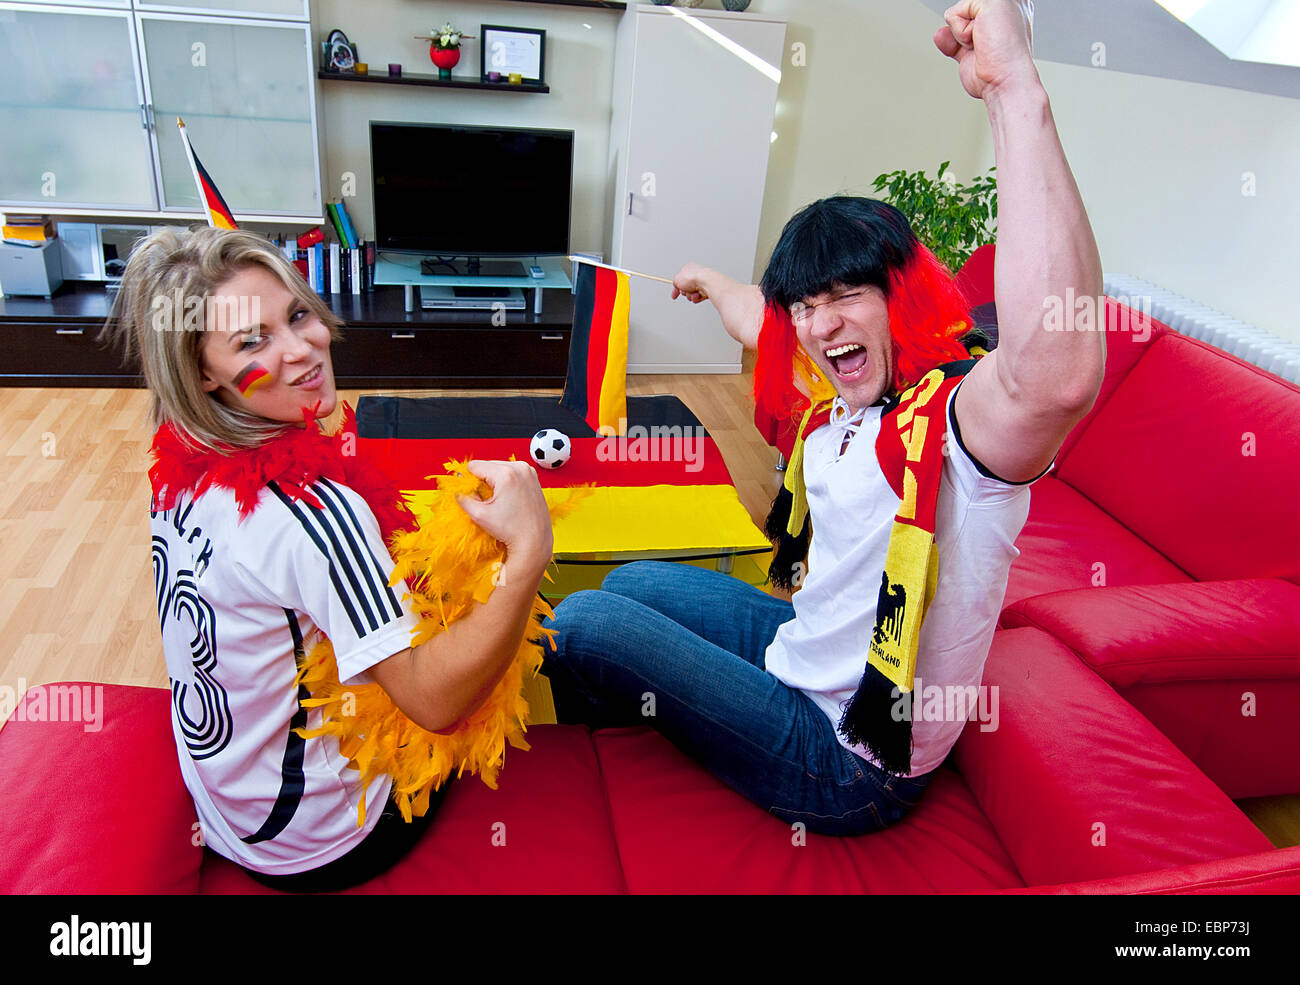 two soccer fans celebrating in living room, Germany Stock Photo